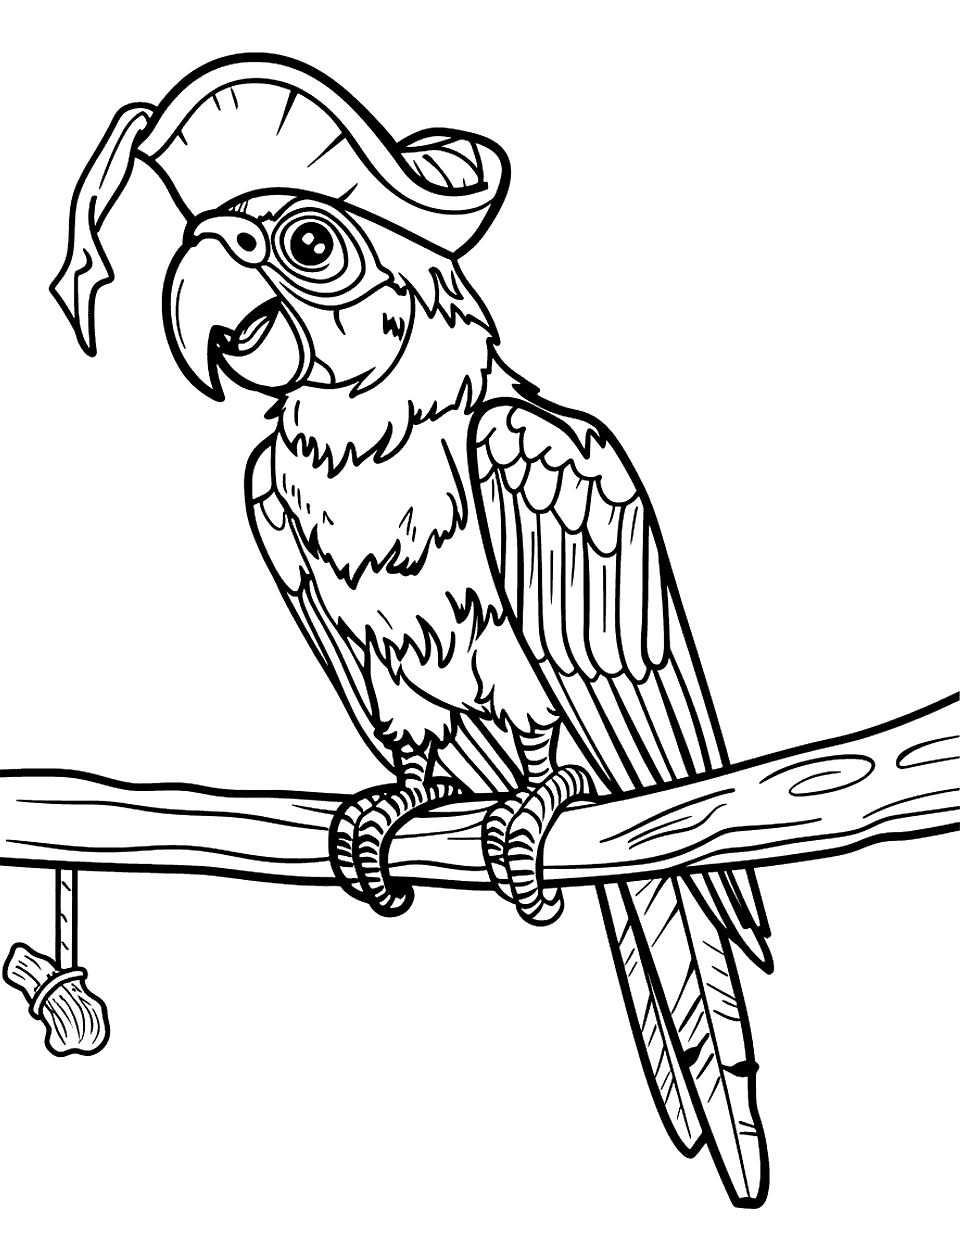 Caribbean Pirate’s Parrot Pirate Coloring Page - A parrot sitting on a branch in the Caribbean.